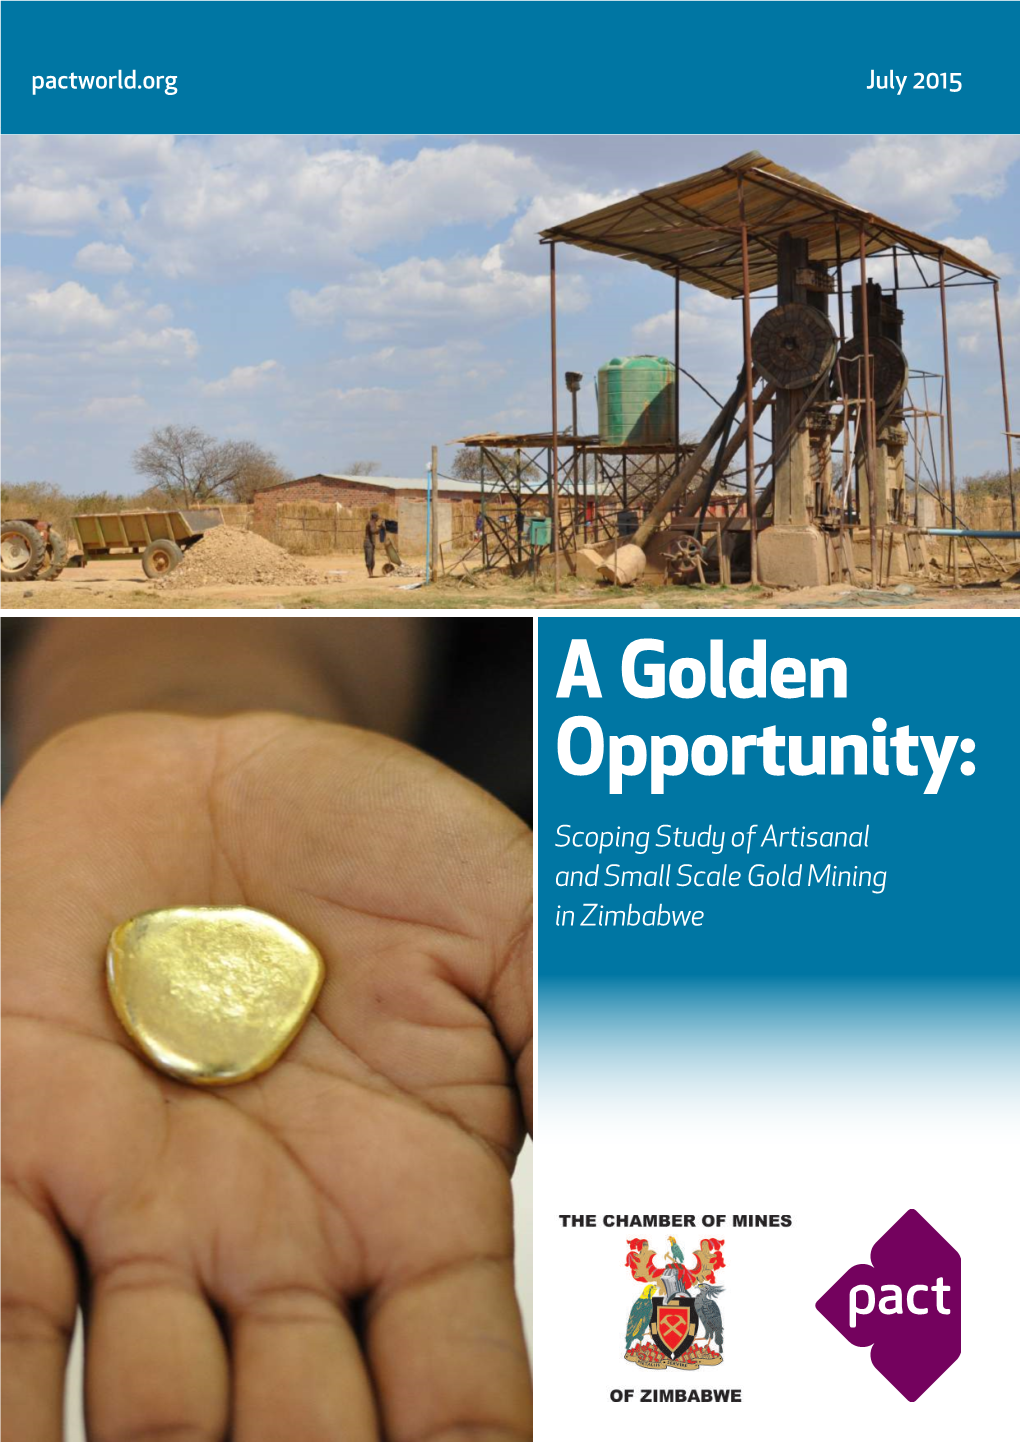 A Golden Opportunity: Scoping Study of Artisanal and Small Scale Gold Mining in Zimbabwe